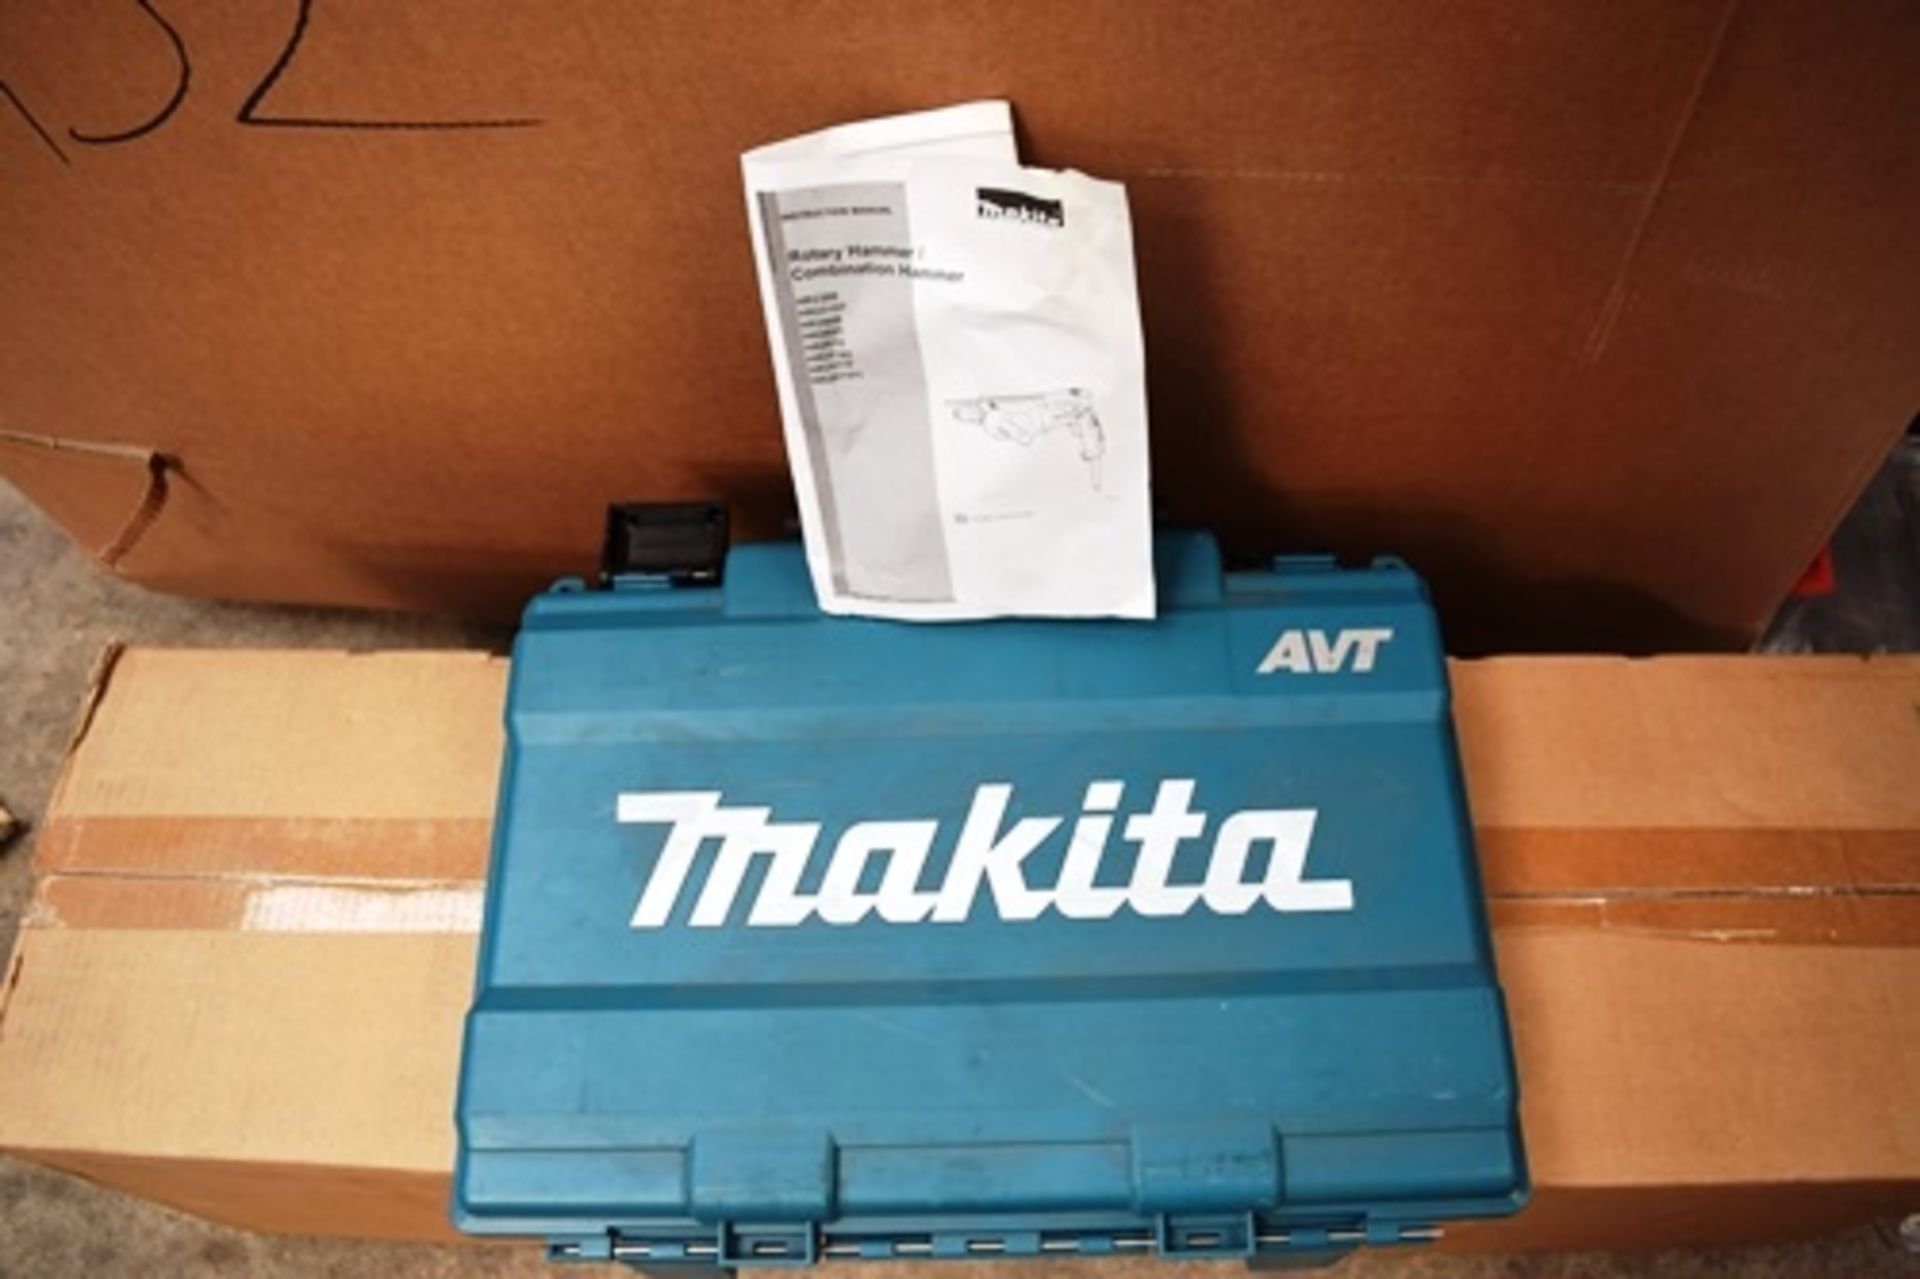 1 x Makita AVT rotary drill, model HR2611F, 240V, with instruction manual and case - Untested ( - Image 2 of 3